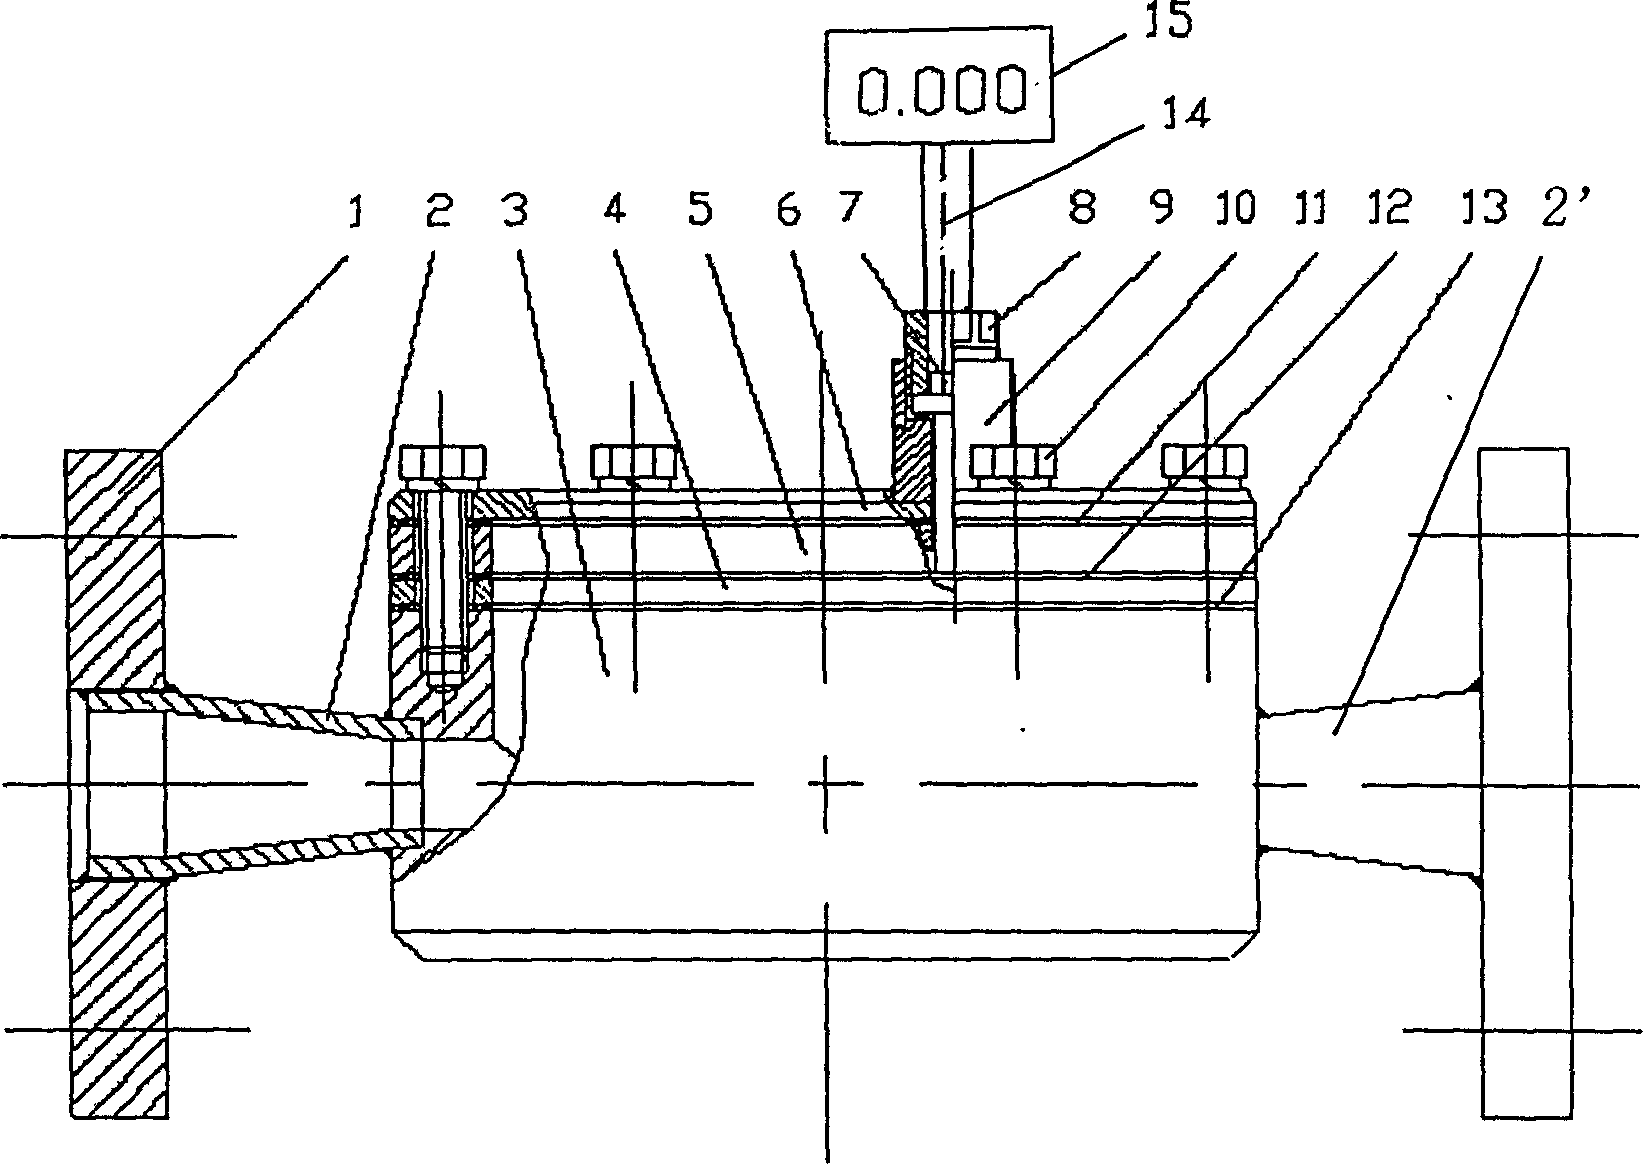 Jet flow meter using vertical drain flow path and double outlet structure